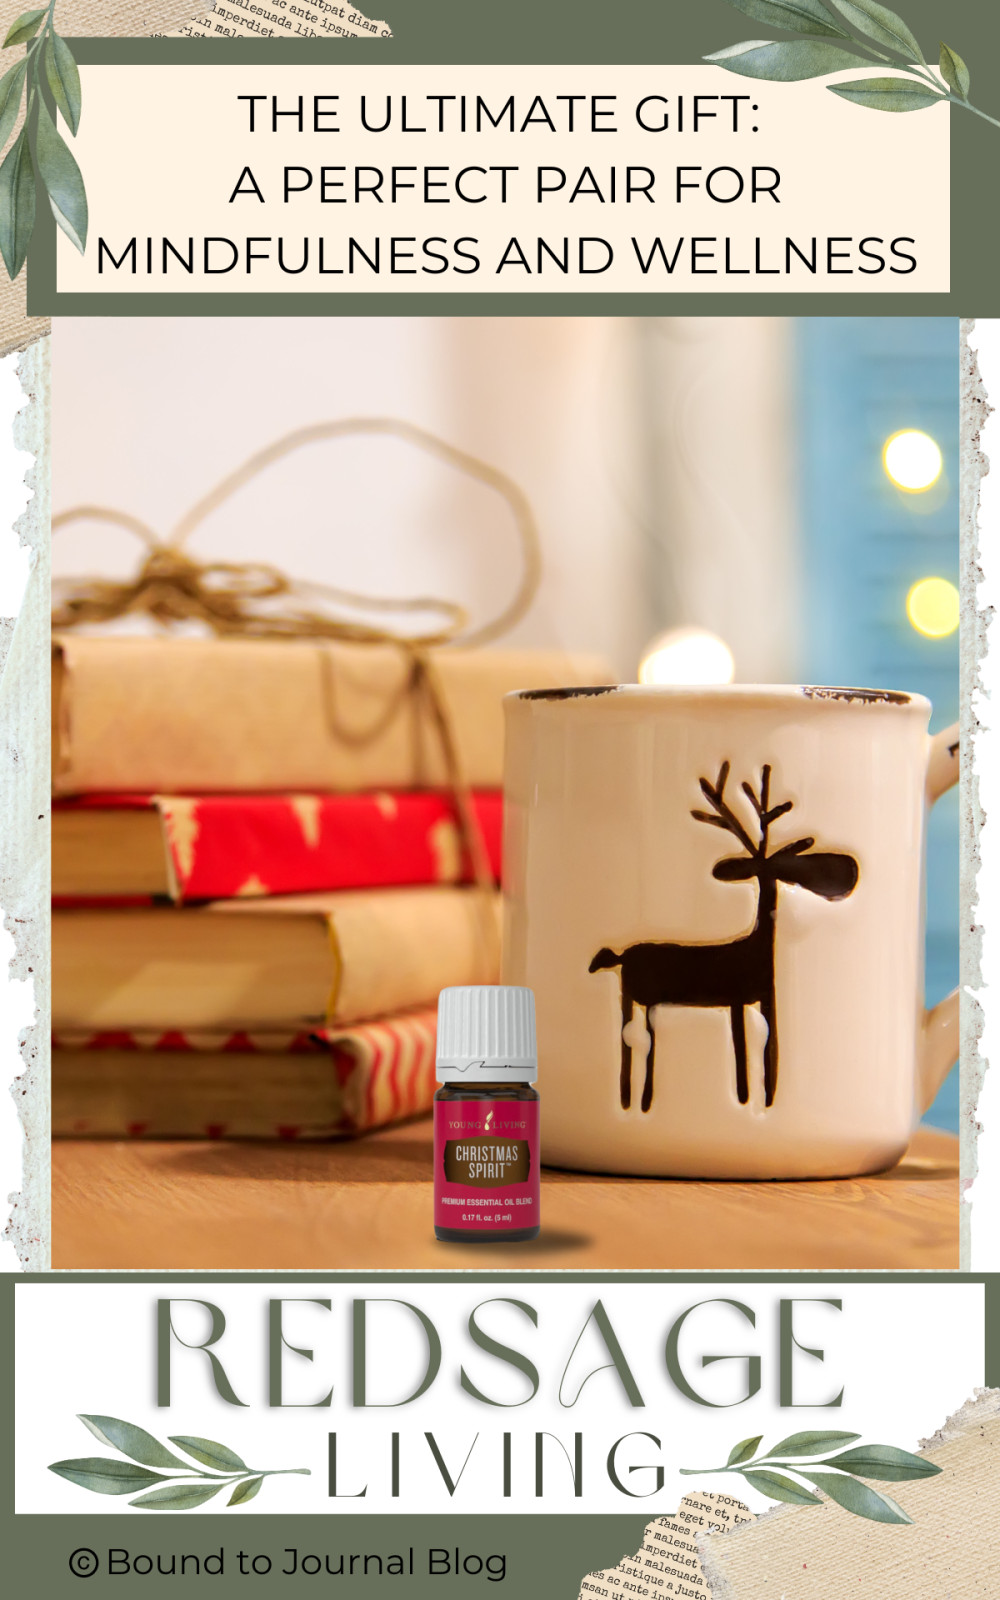 The Ultimate Gift: Journals and Essential Oils - A Perfect Pair for Mindfulness and Wellness